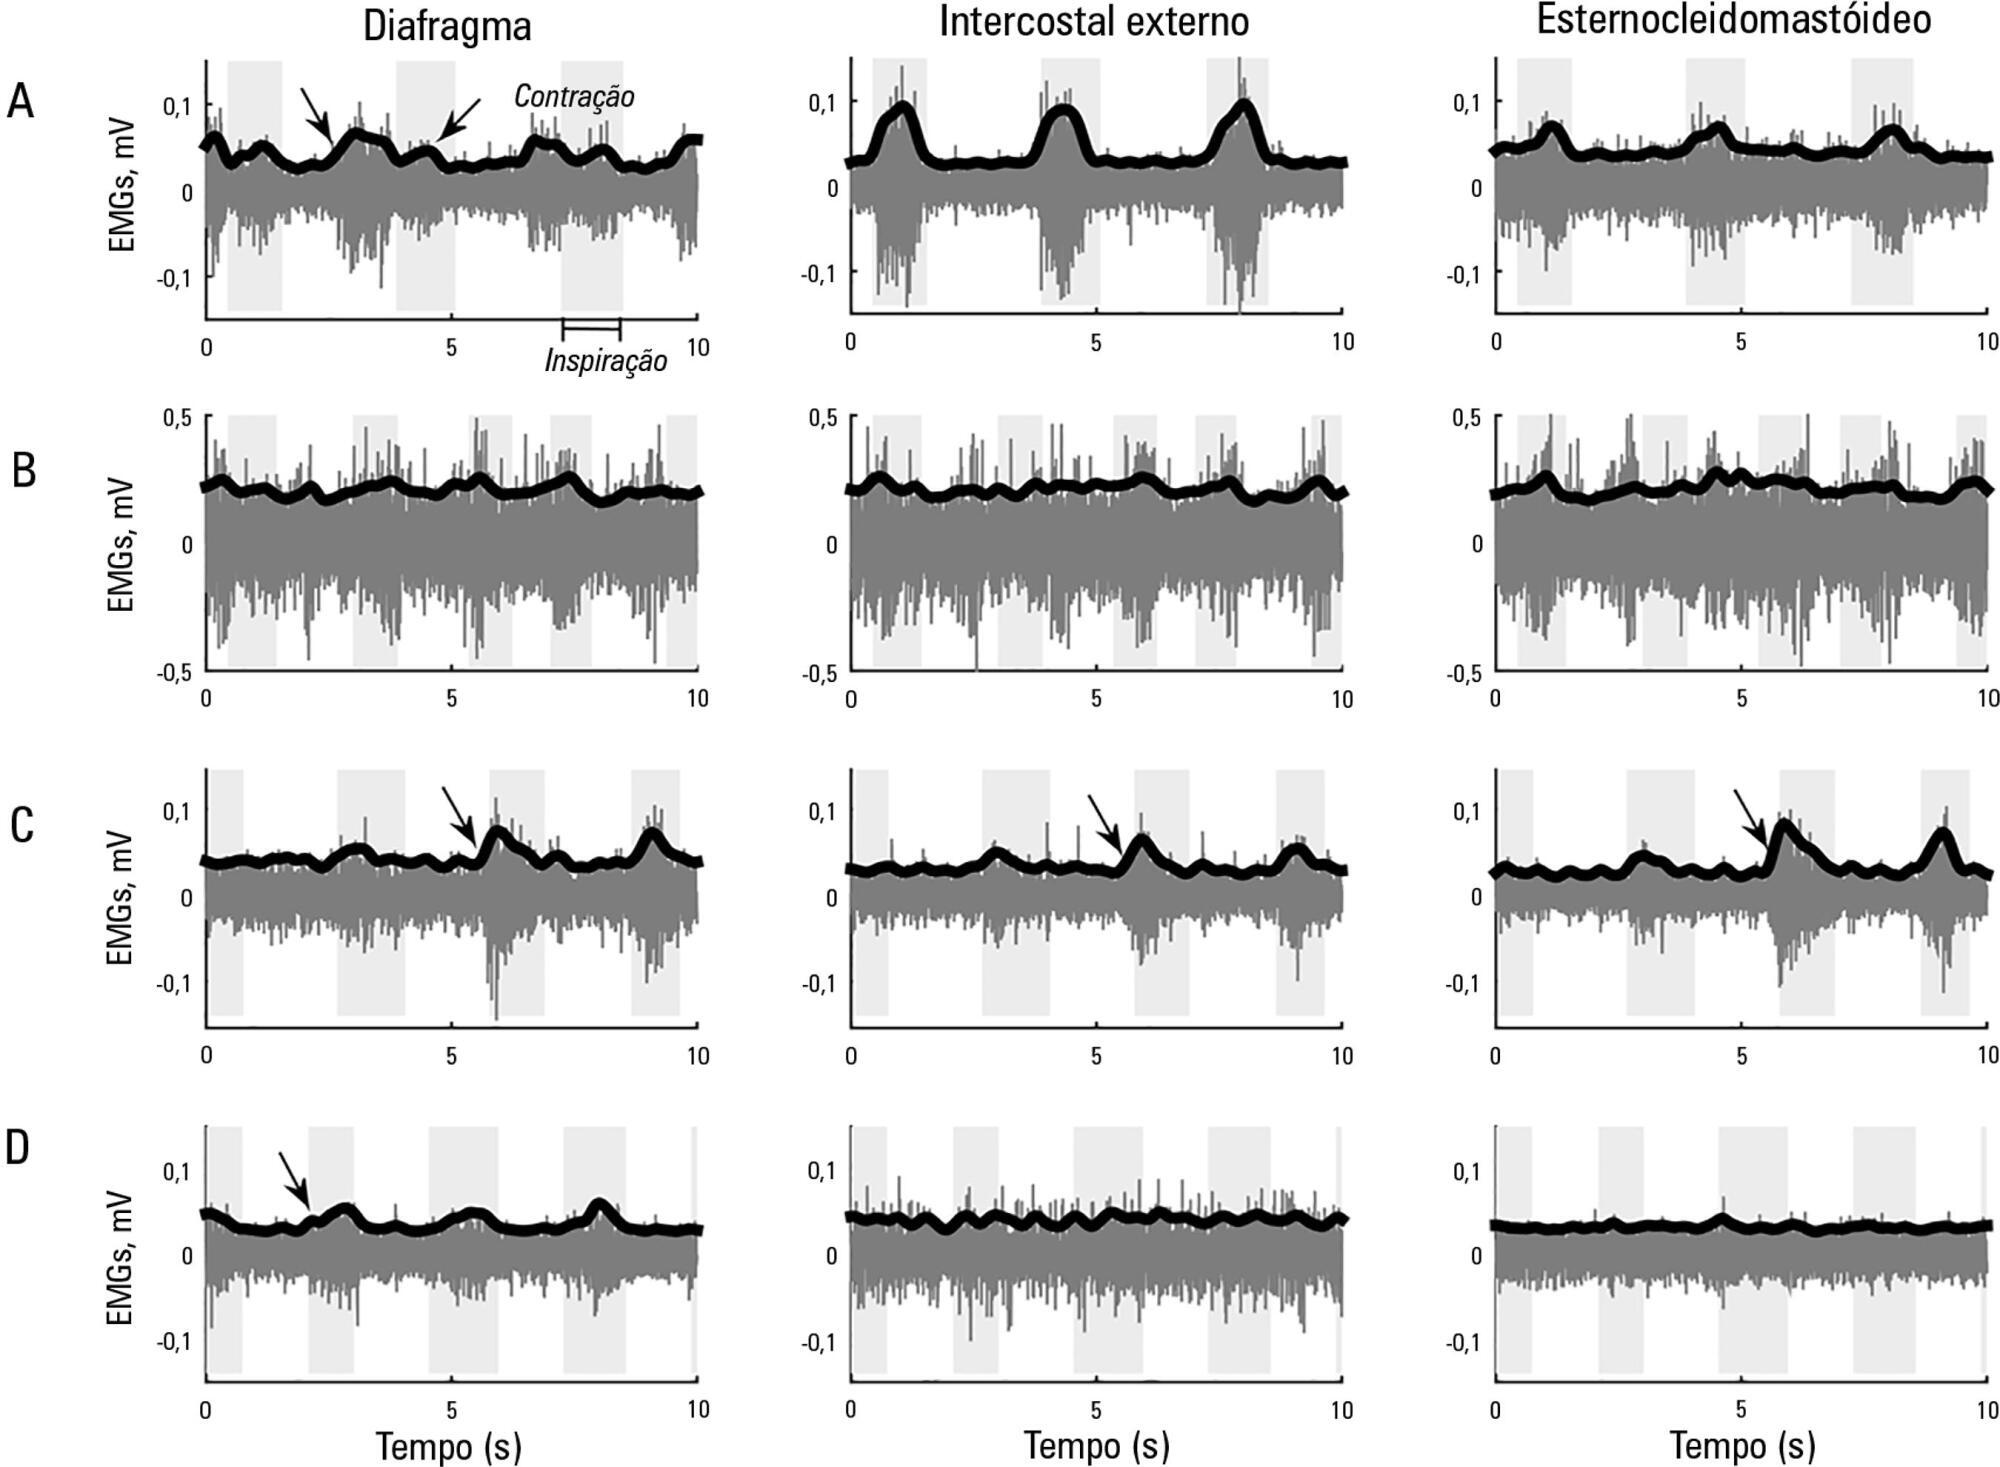 Potential clinical application of surface electromyography as indicator of neuromuscular recovery during weaning tests after organophosphate poisoning